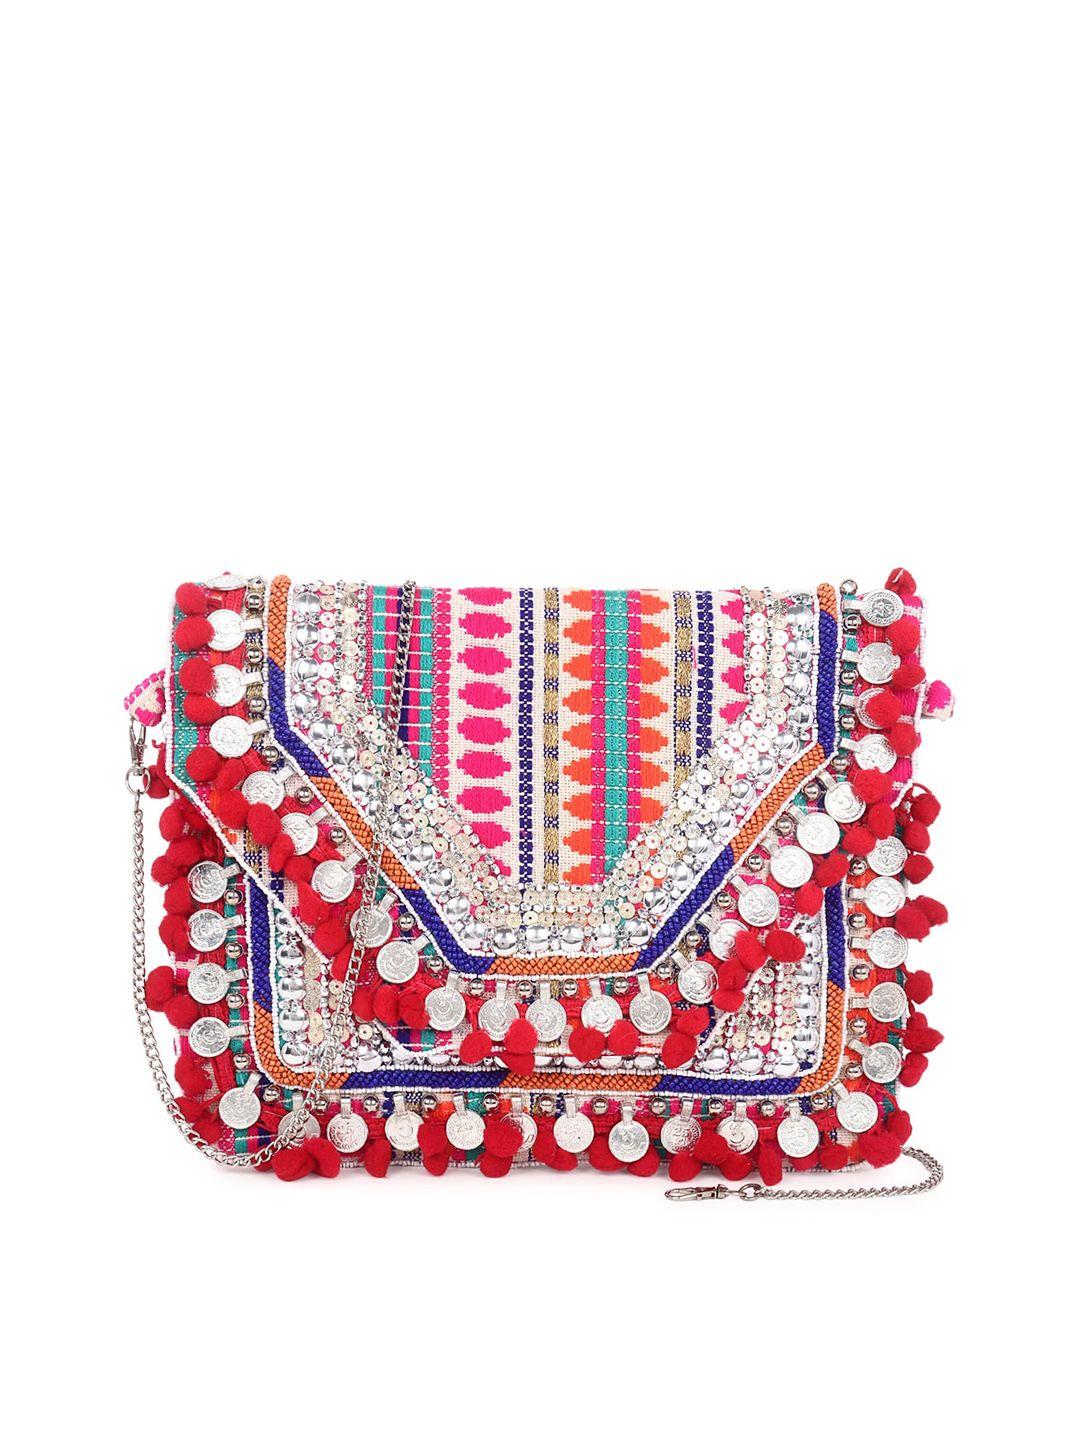 swisni-women-pink-embroidered-and-embellished-clutches